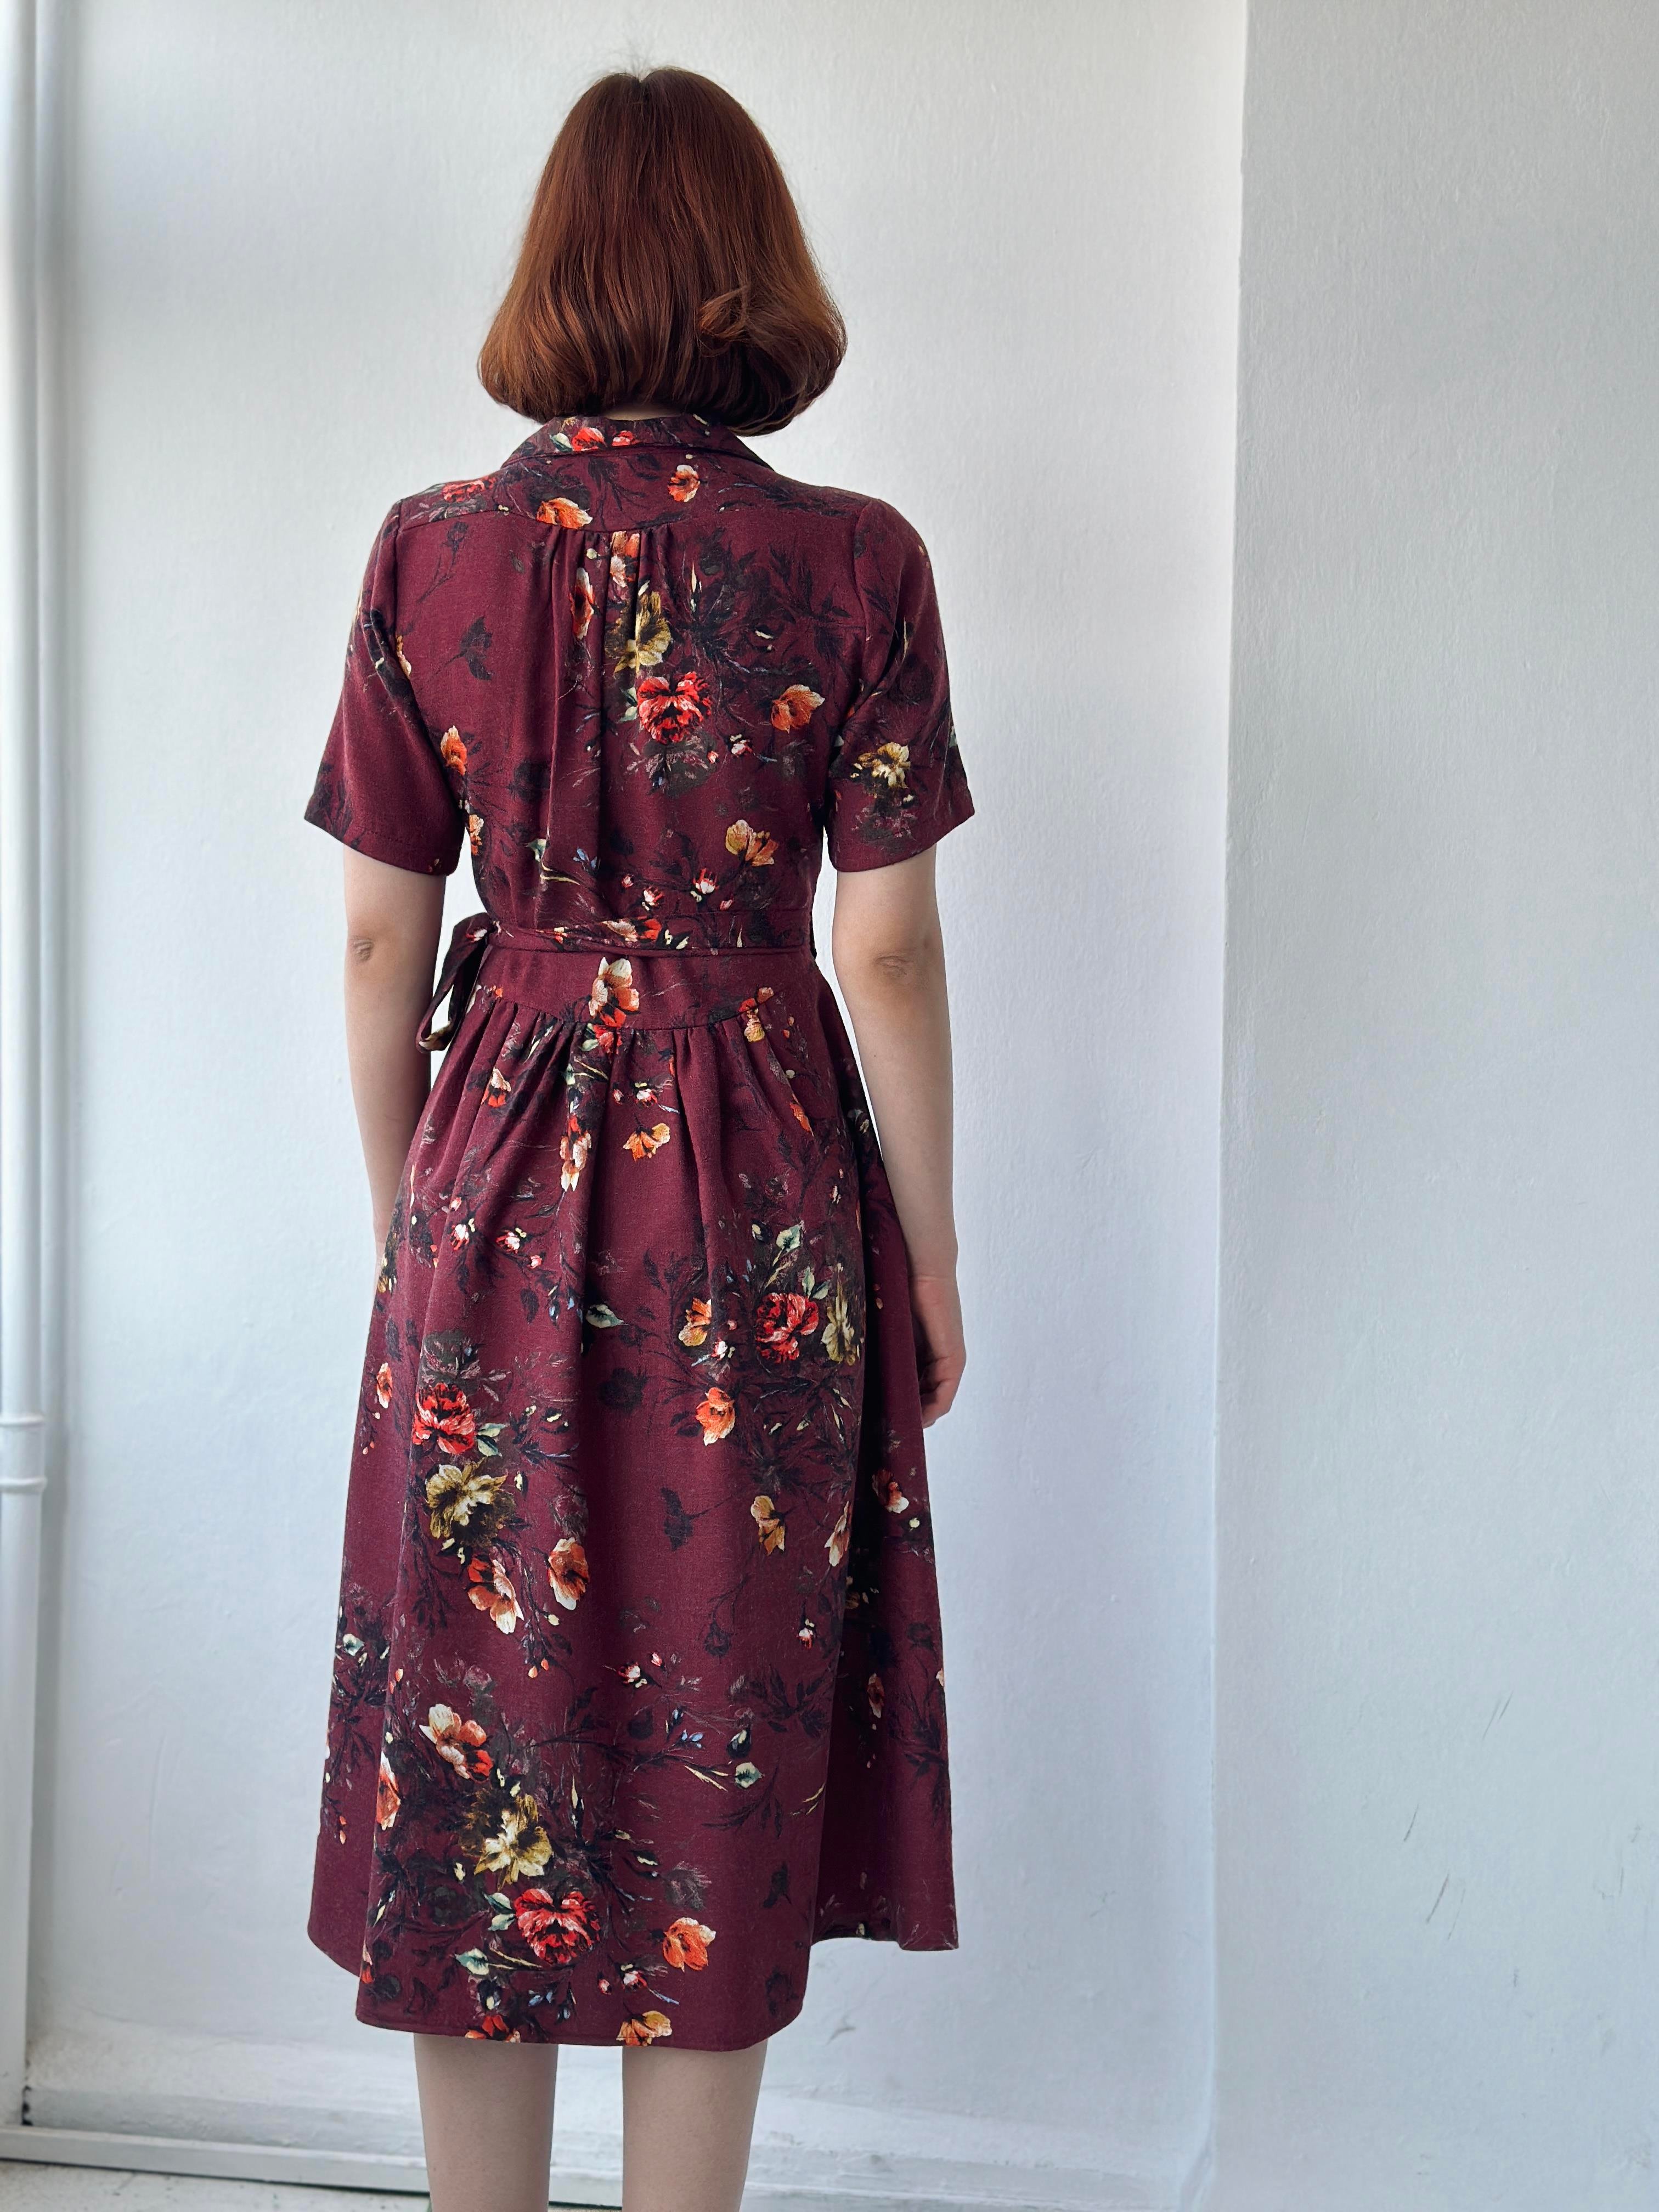 The Single-breasted Floral Midi Dress